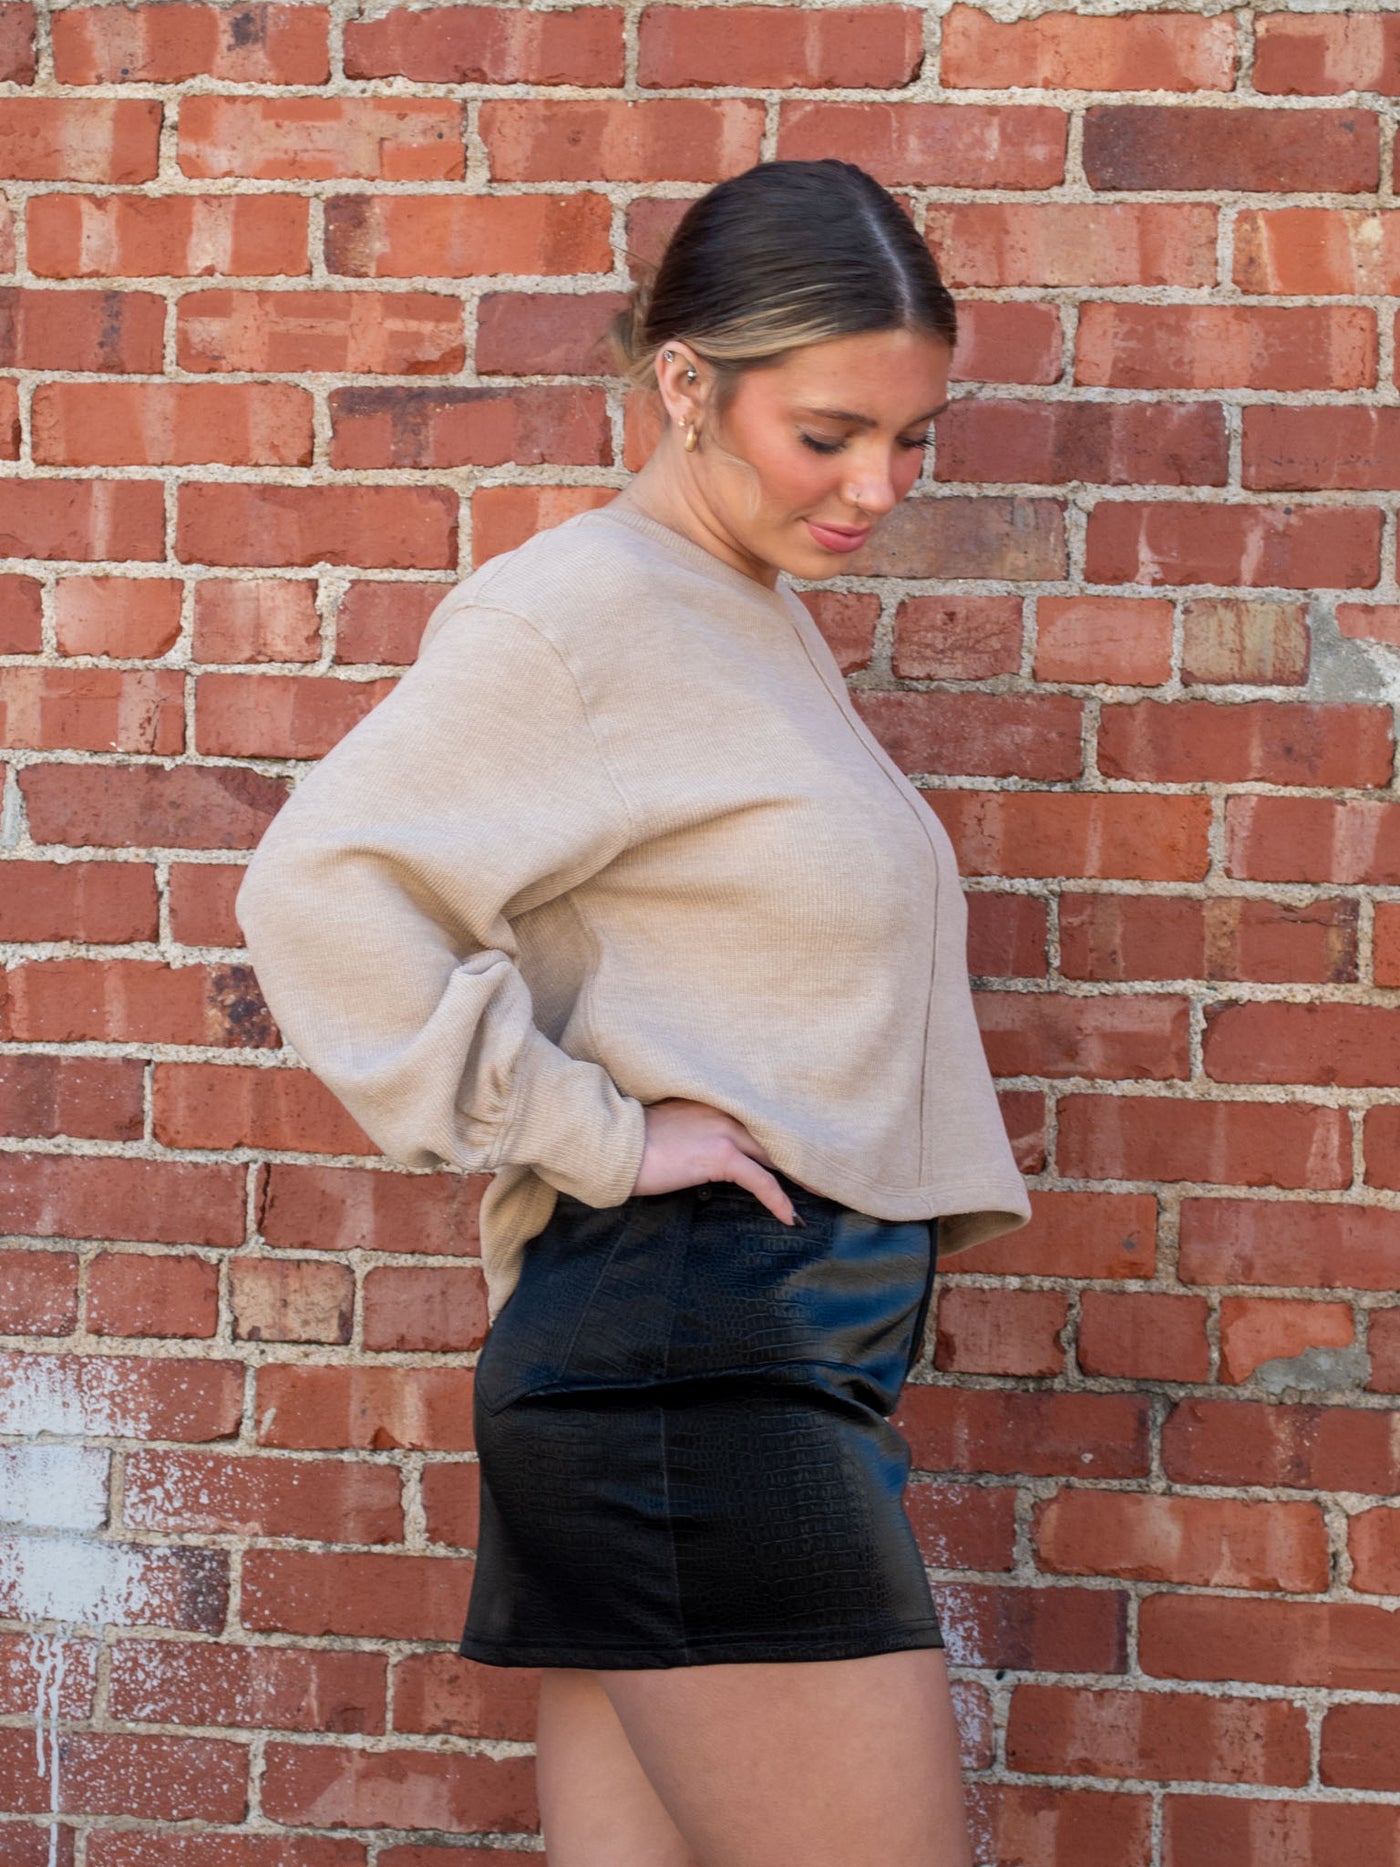 A model wearing a tan sweater with a seam detail. The model has it paired with a black faux leather mini skirt.